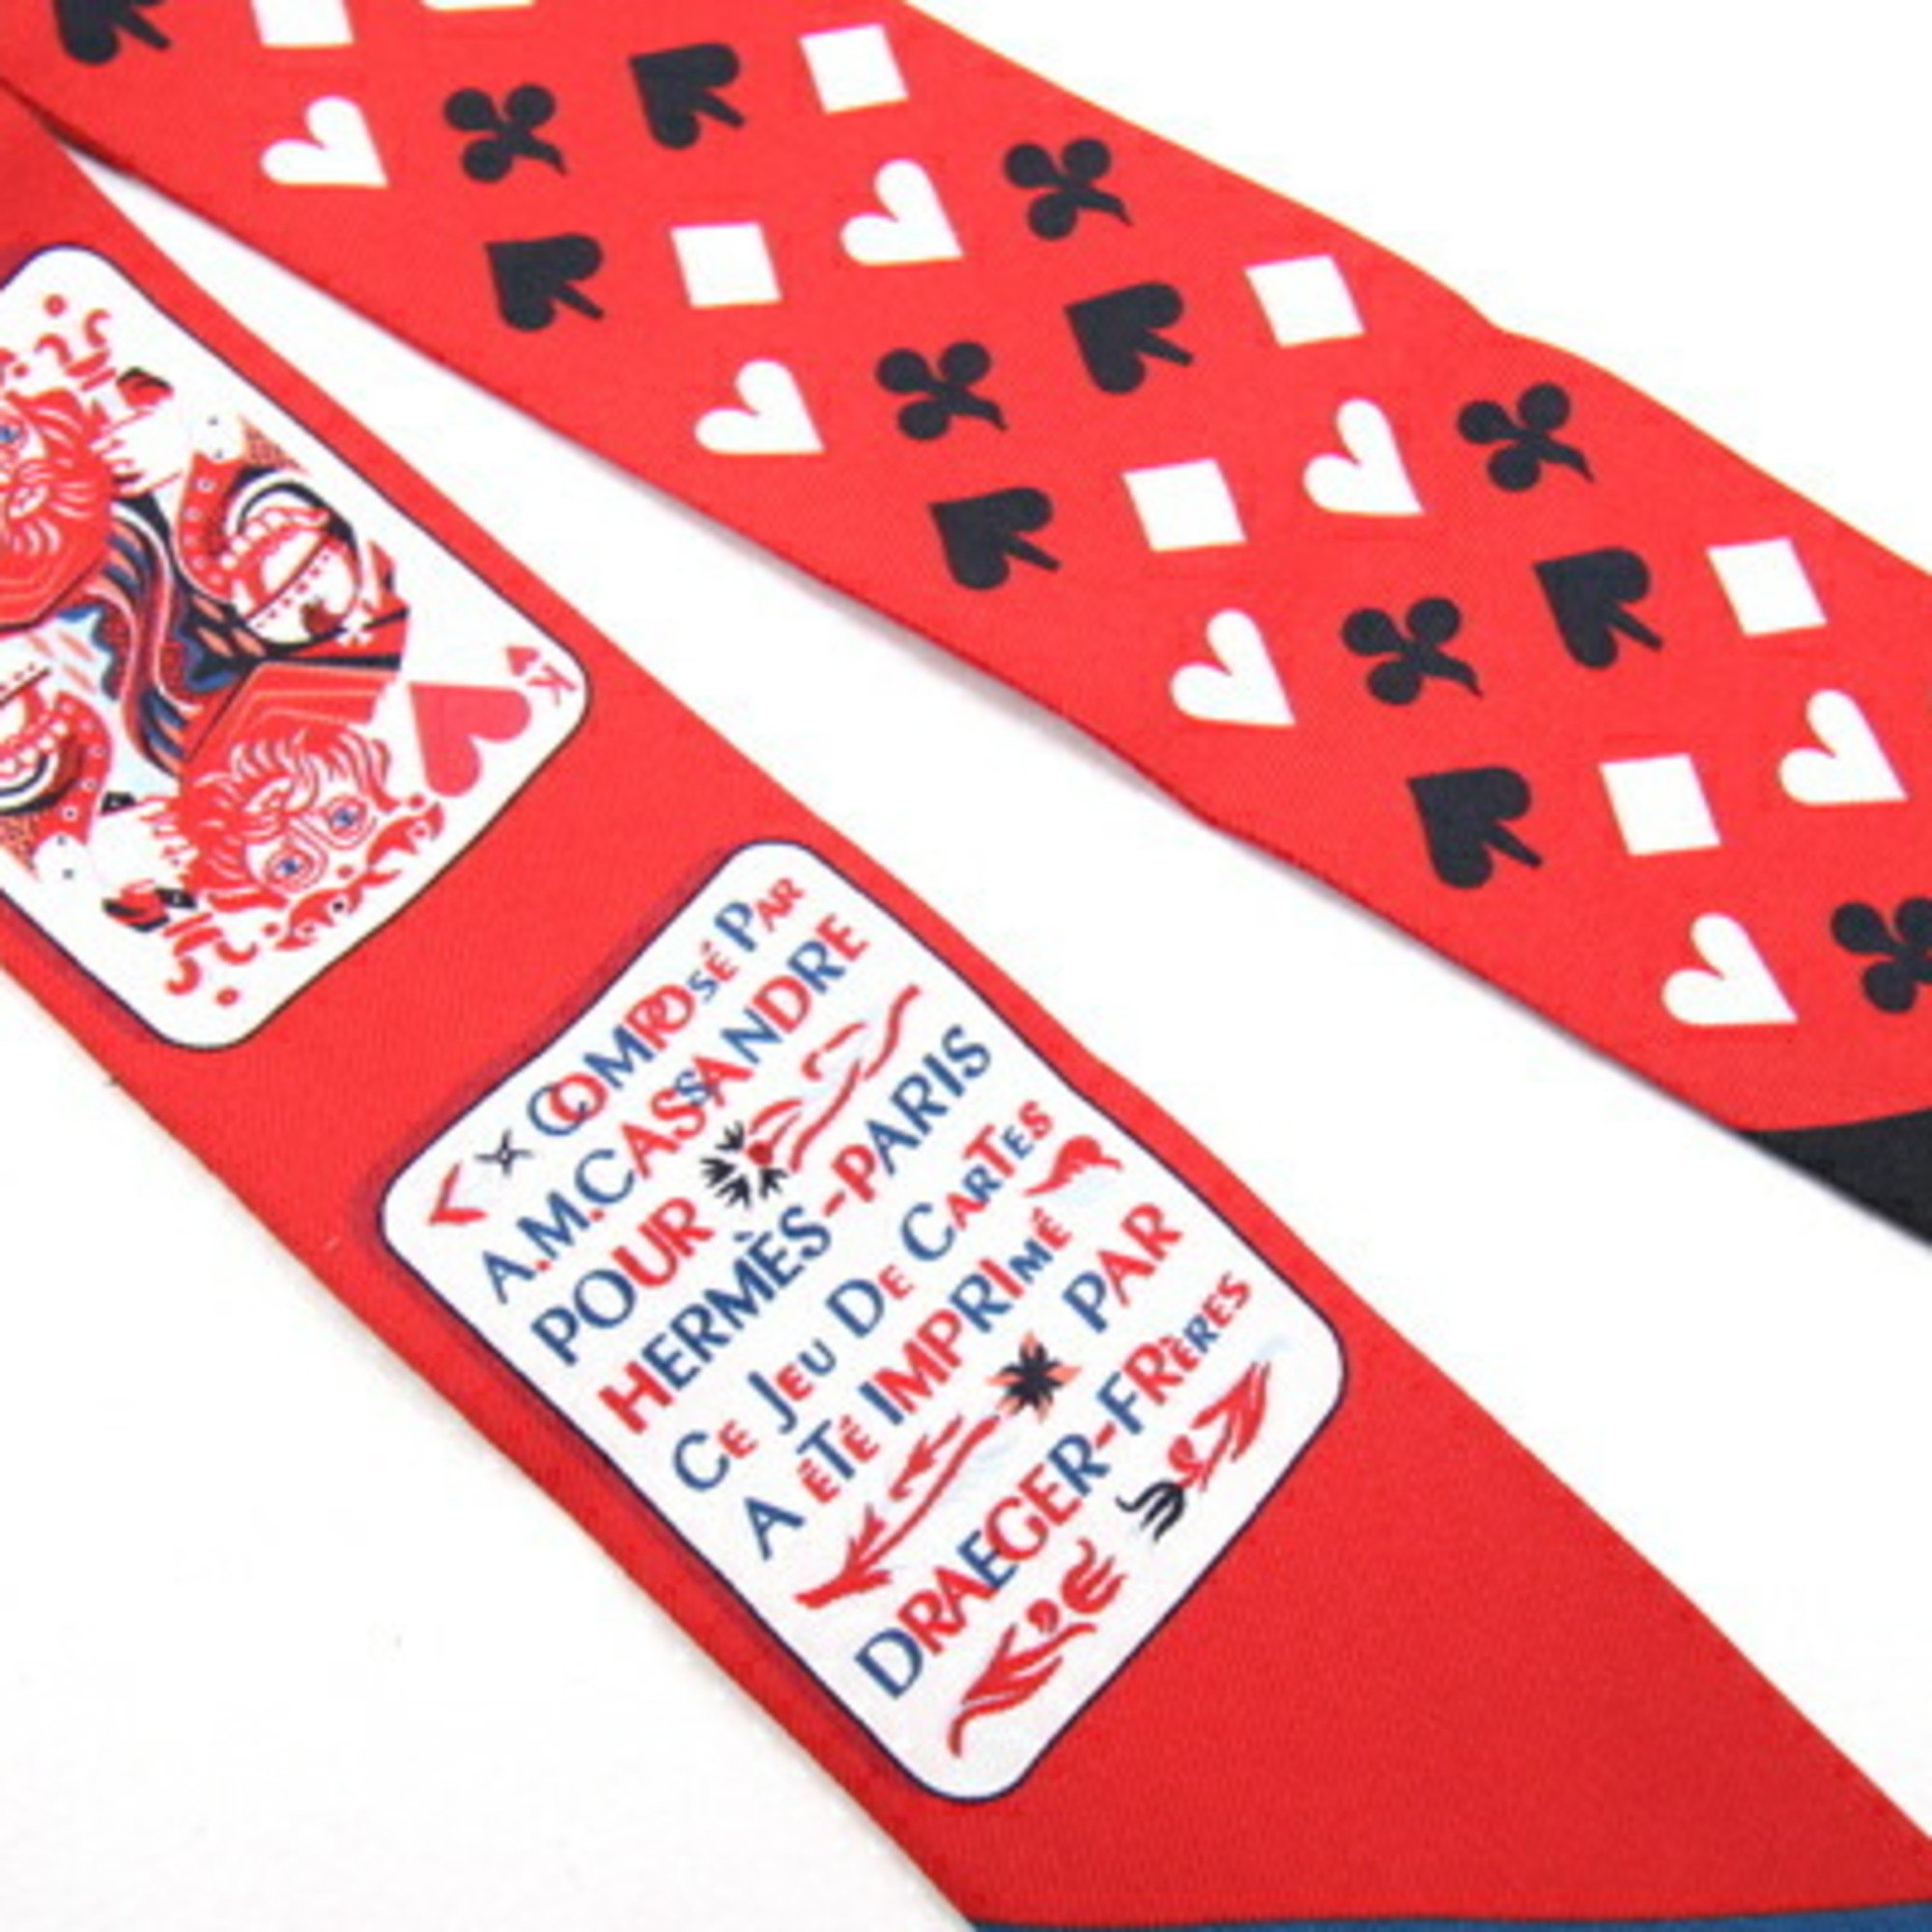 Hermes Scarf Muffler Twilly Card Came Red 100% Silk Ribbon Bag Charm Playing Cards Women's Jeu de Cartes HERMES